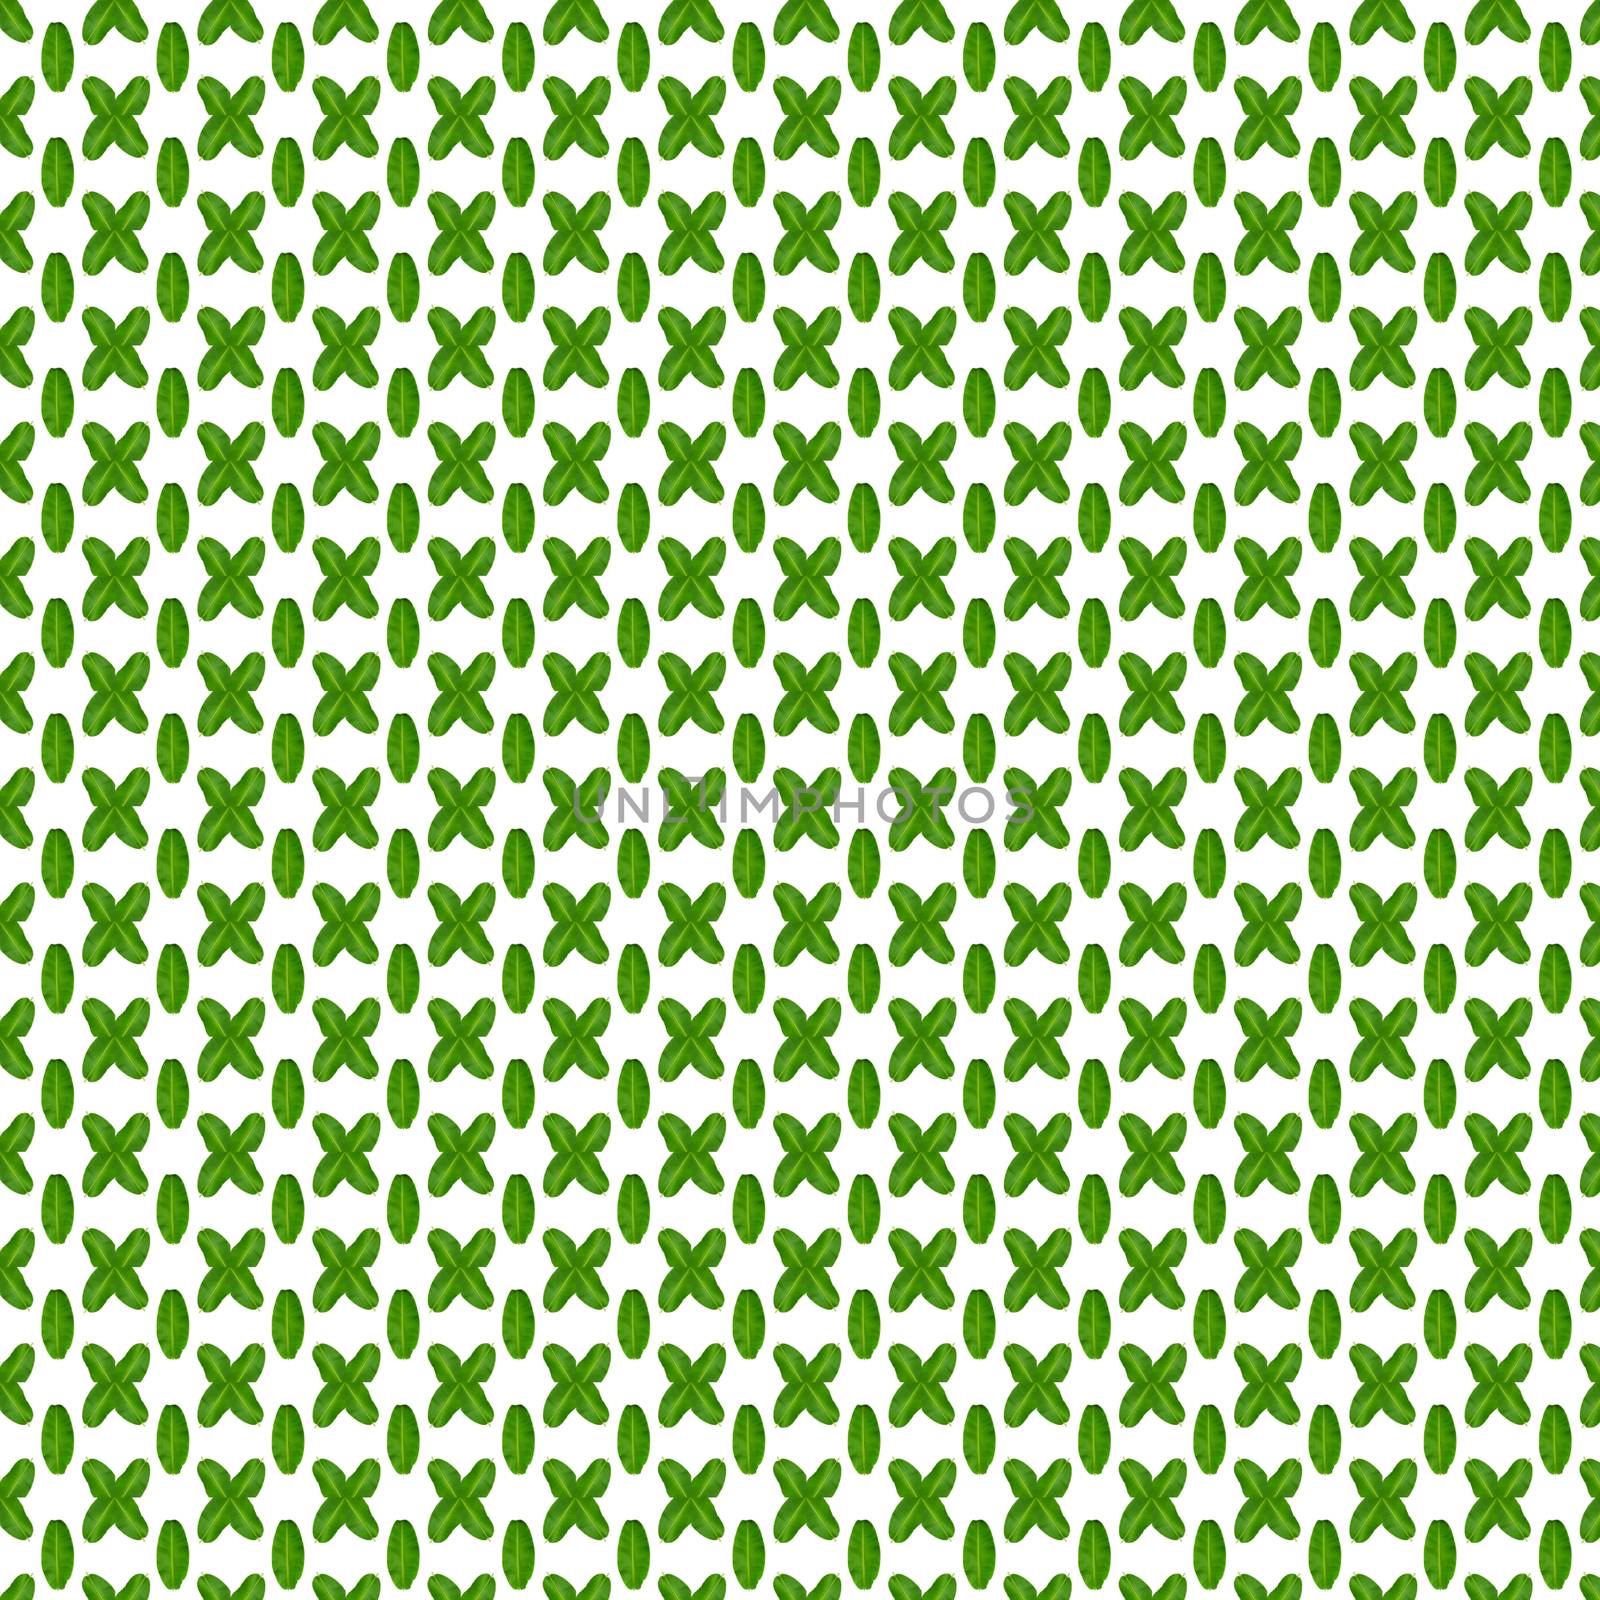 Seamless pattern of green banana leaves on white background. Plants seamless pattern concept.